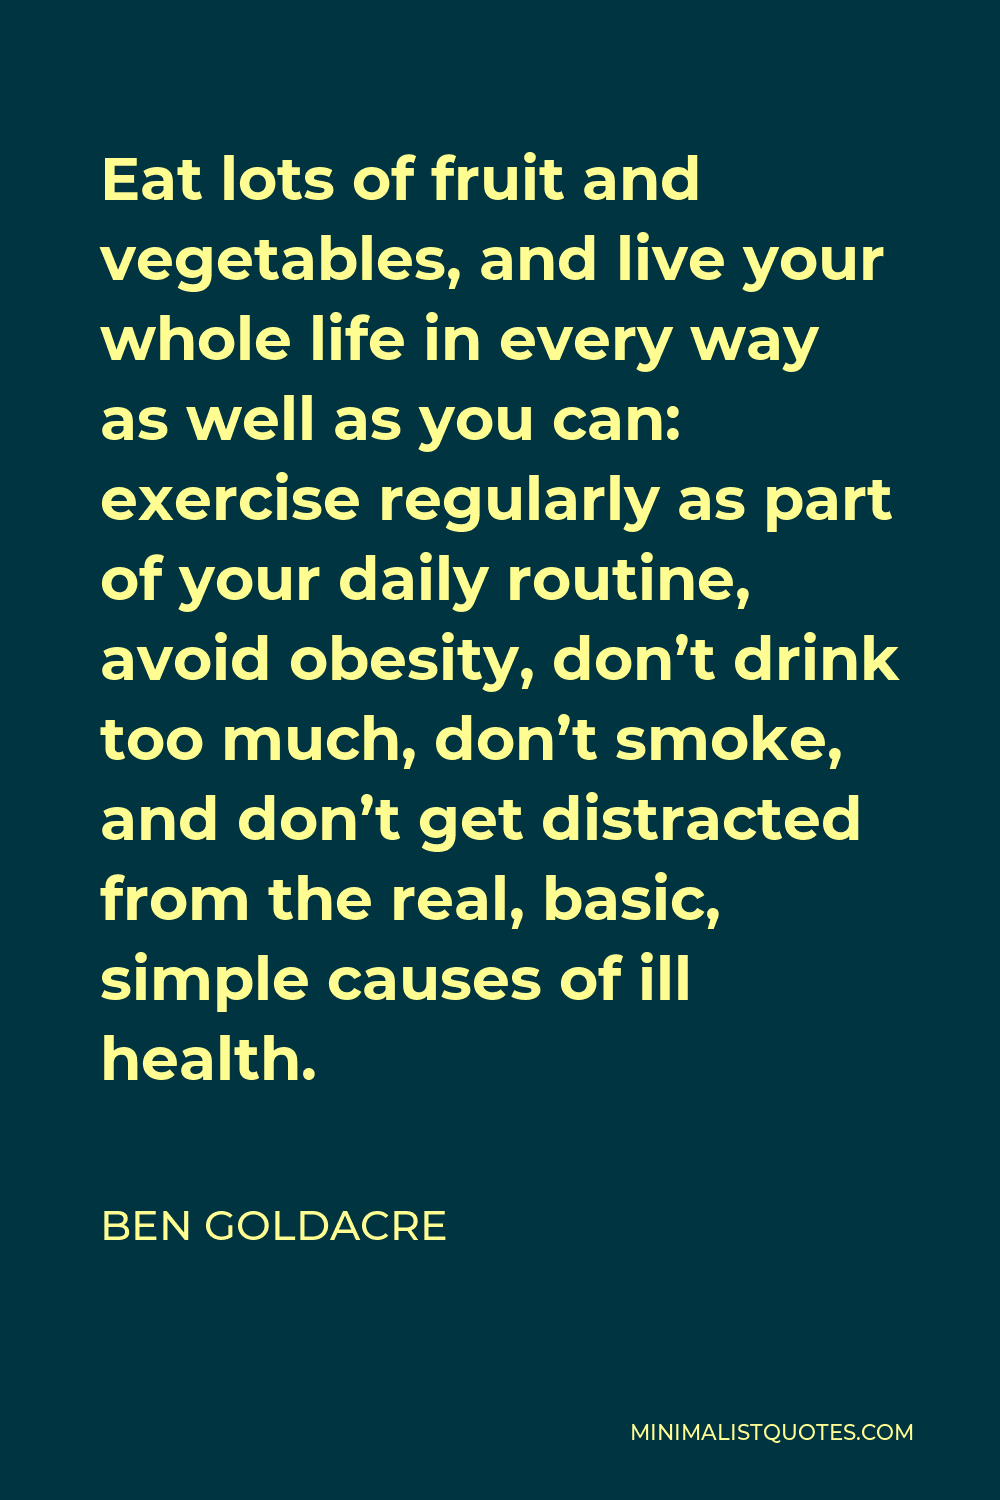 Ben Goldacre Quote - Eat lots of fruit and vegetables, and live your whole life in every way as well as you can: exercise regularly as part of your daily routine, avoid obesity, don’t drink too much, don’t smoke, and don’t get distracted from the real, basic, simple causes of ill health.